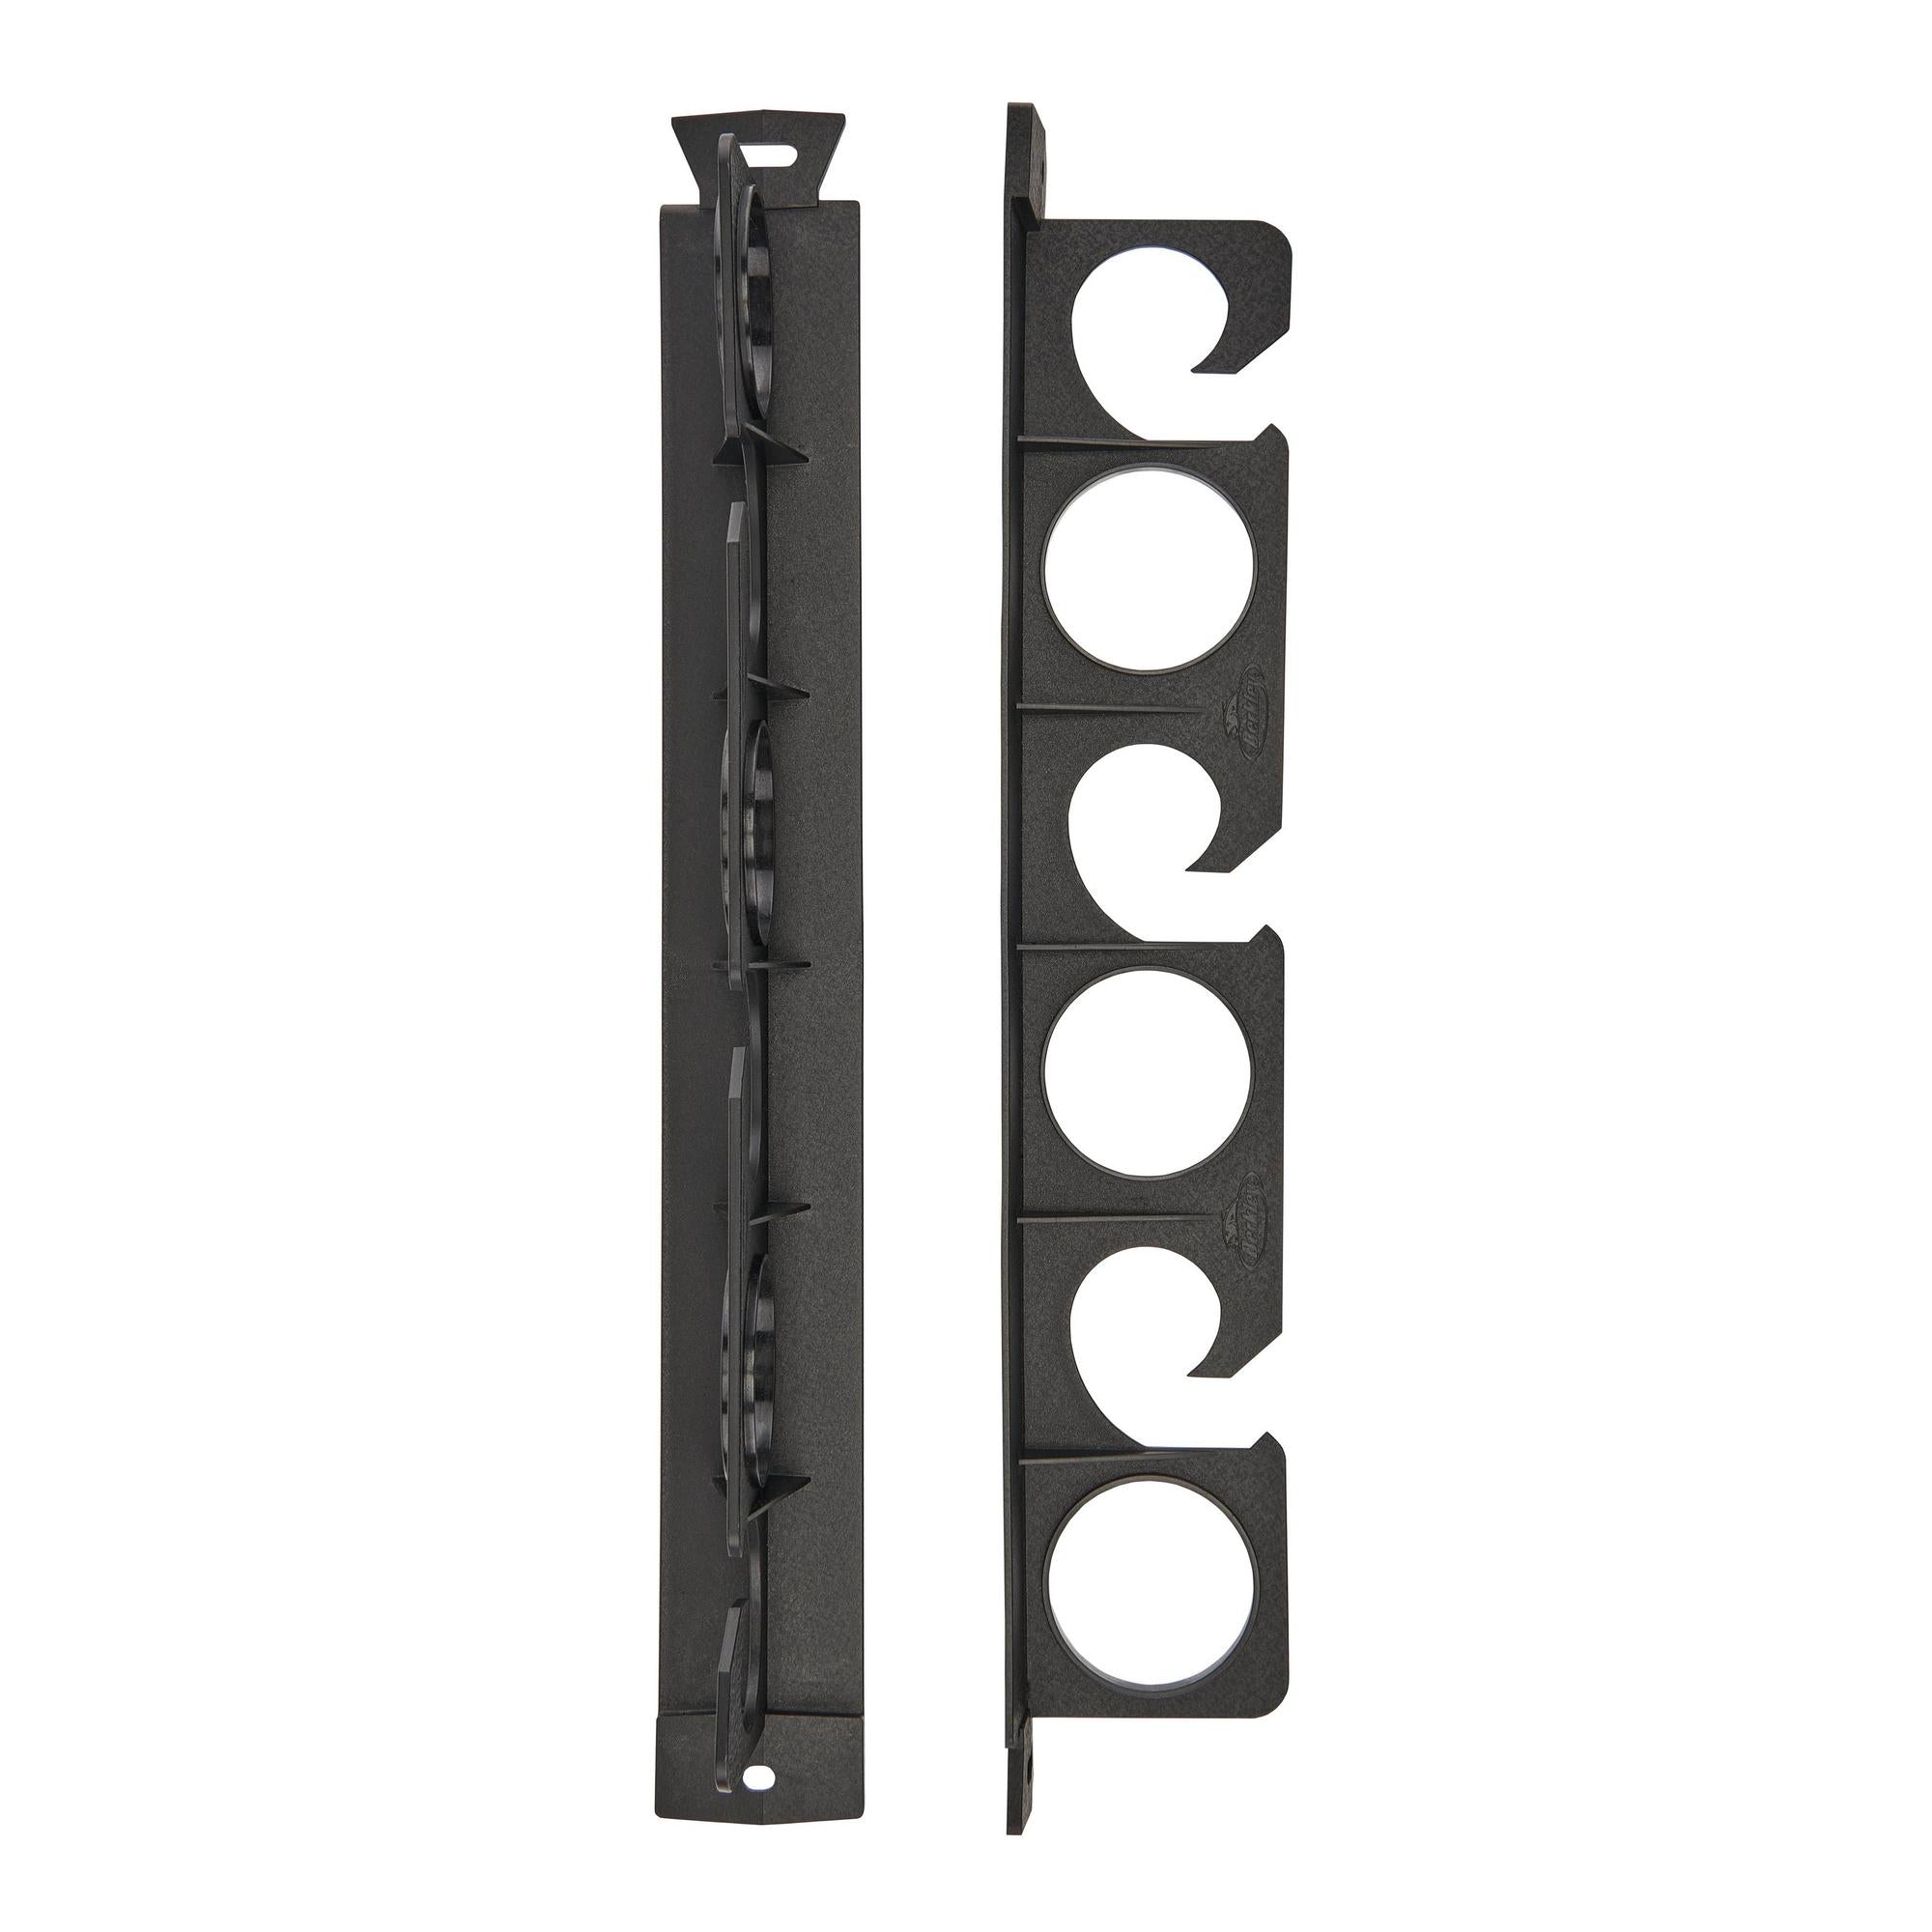  Wall Mounted Fishing Rod Holders Tubes Links Fishing Rod Holder  Rack Rests (1-Pole-Black) : Sports & Outdoors